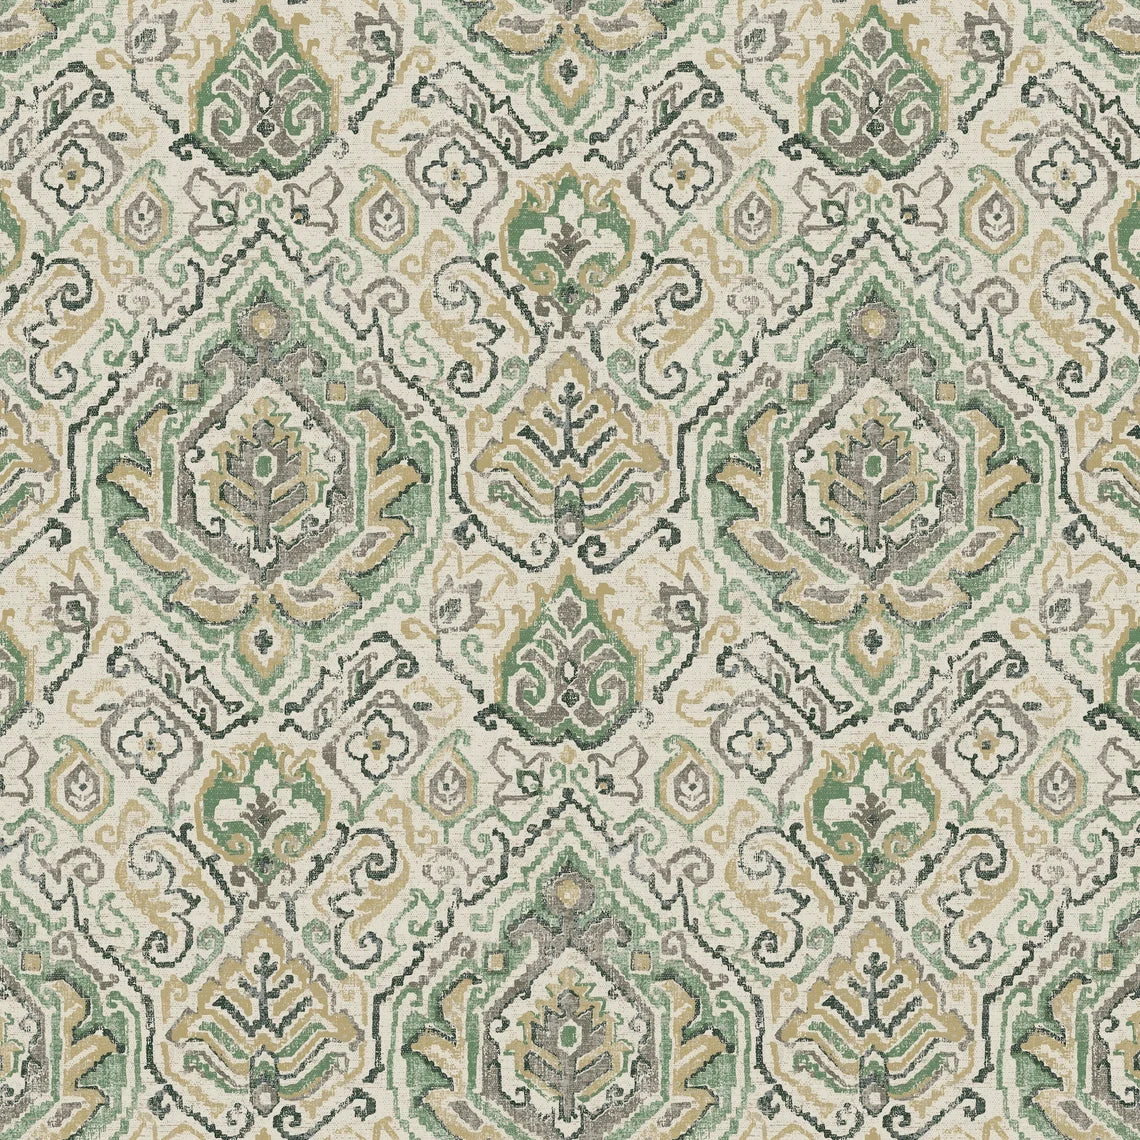 Shower Curtain in Cathell Meadow Green Medallion Weathered Persian Rug Design- Large Scale